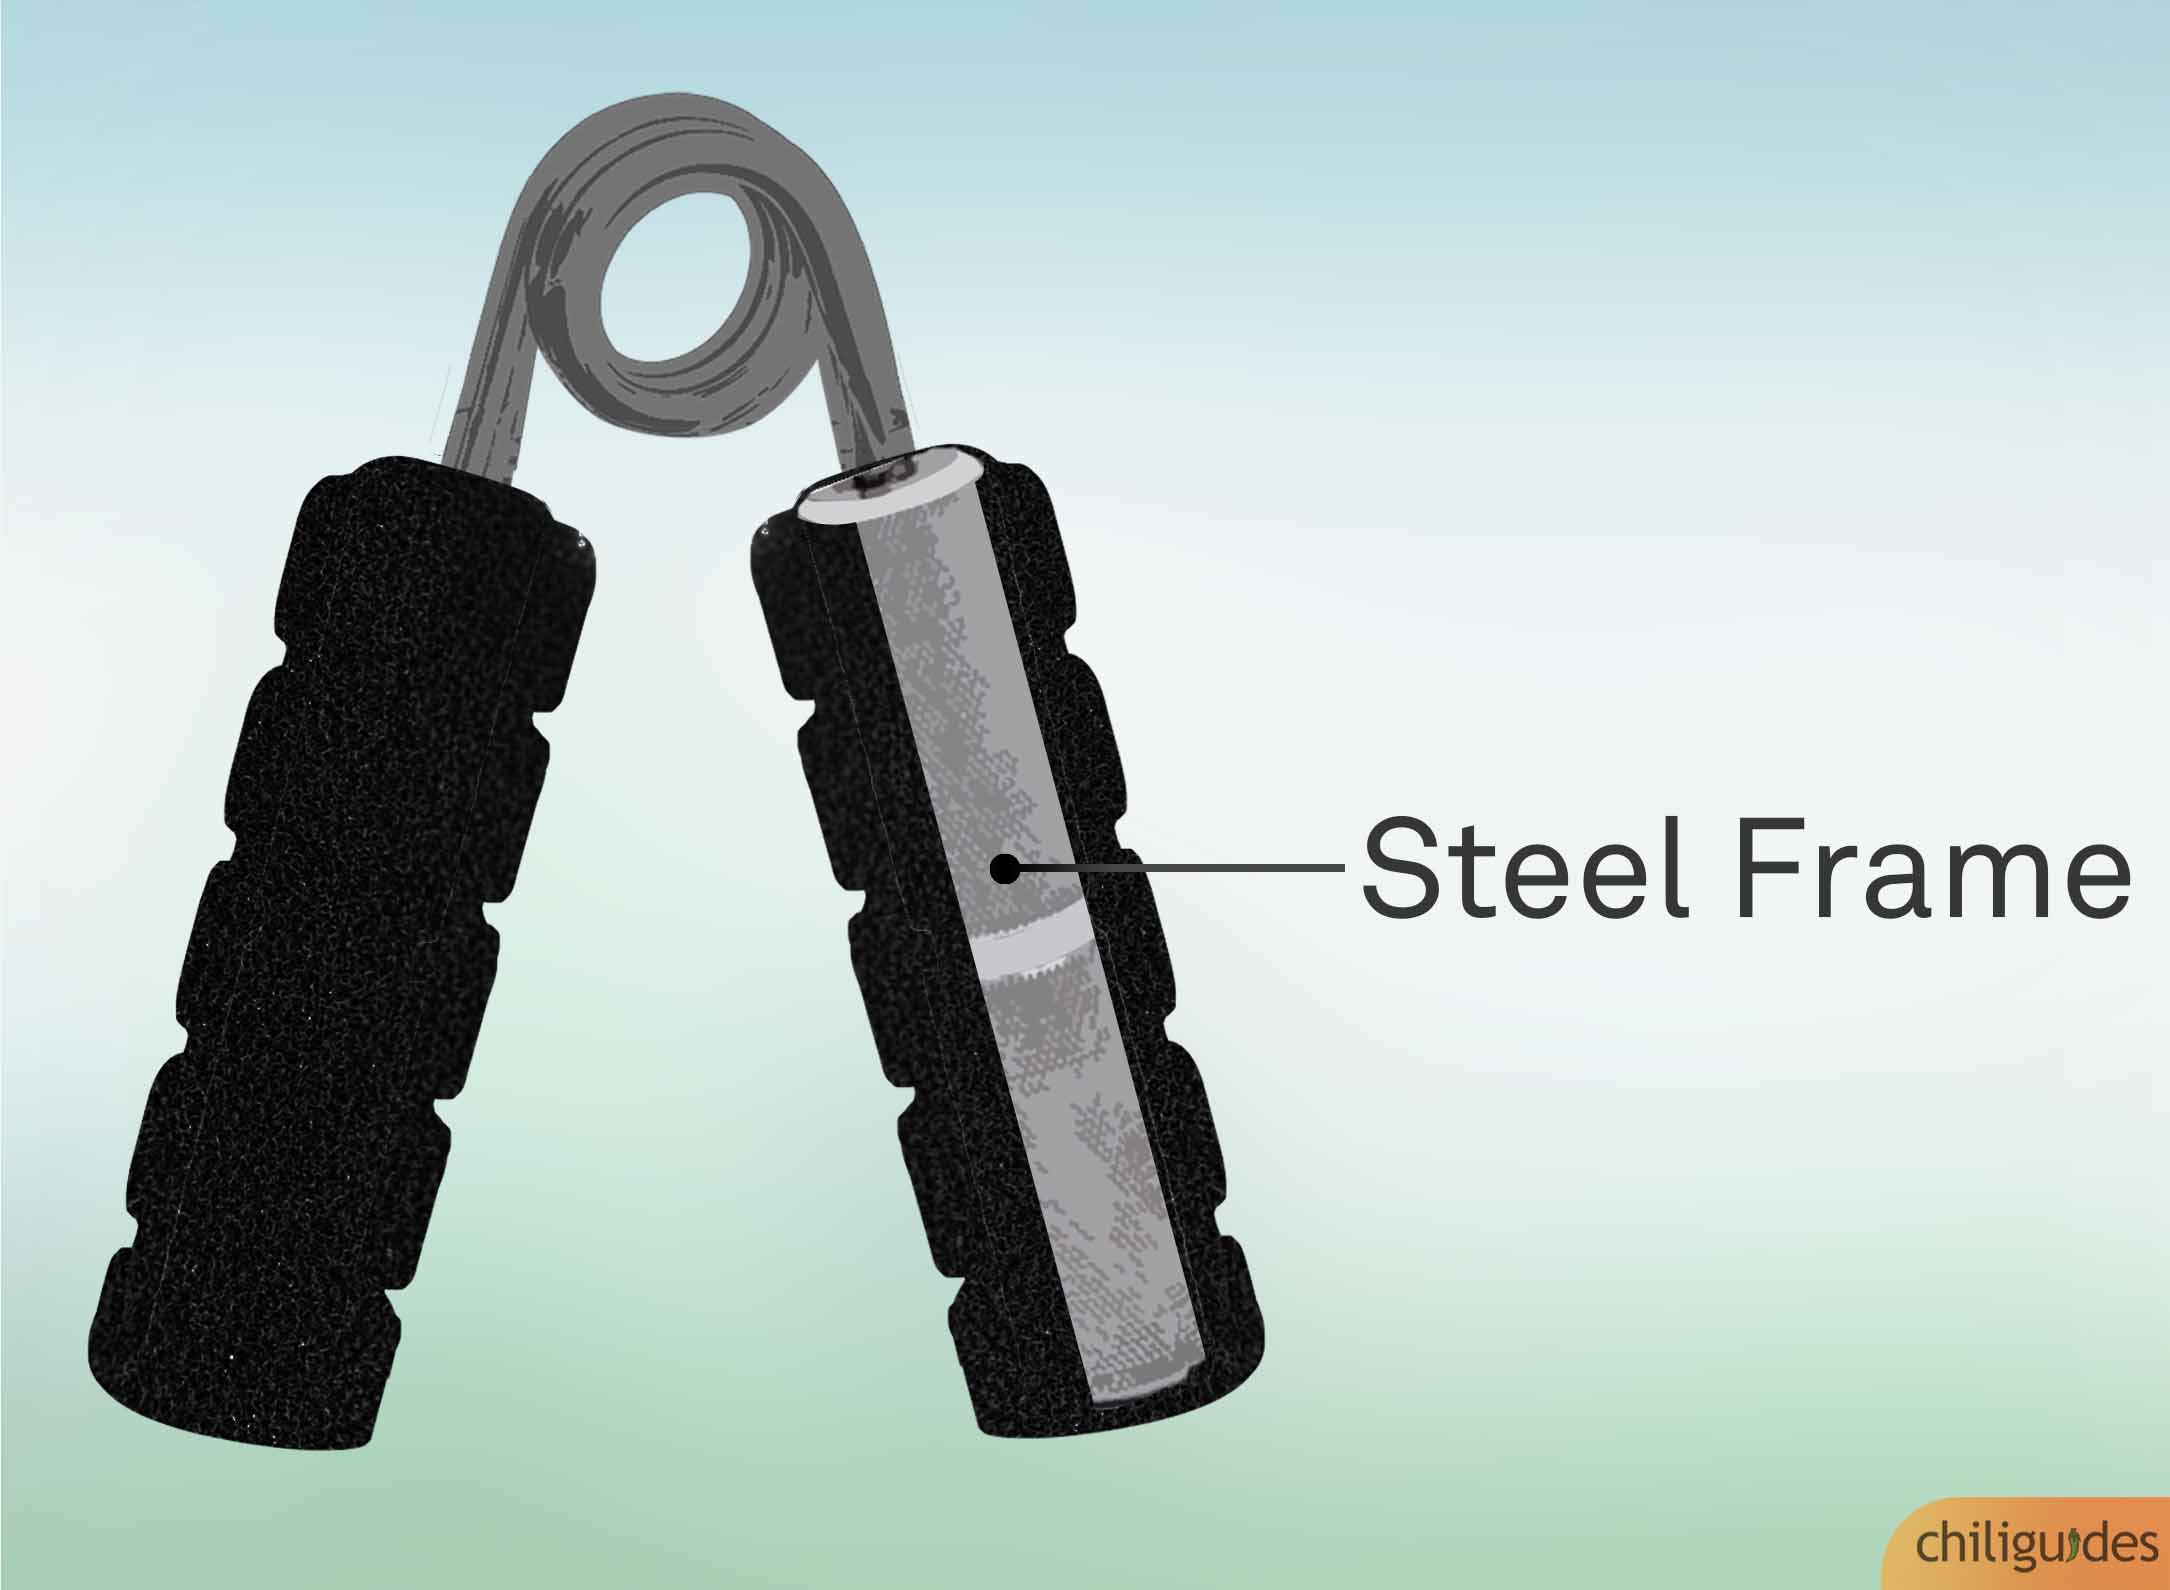 Steel grip strengtheners are safer to use.